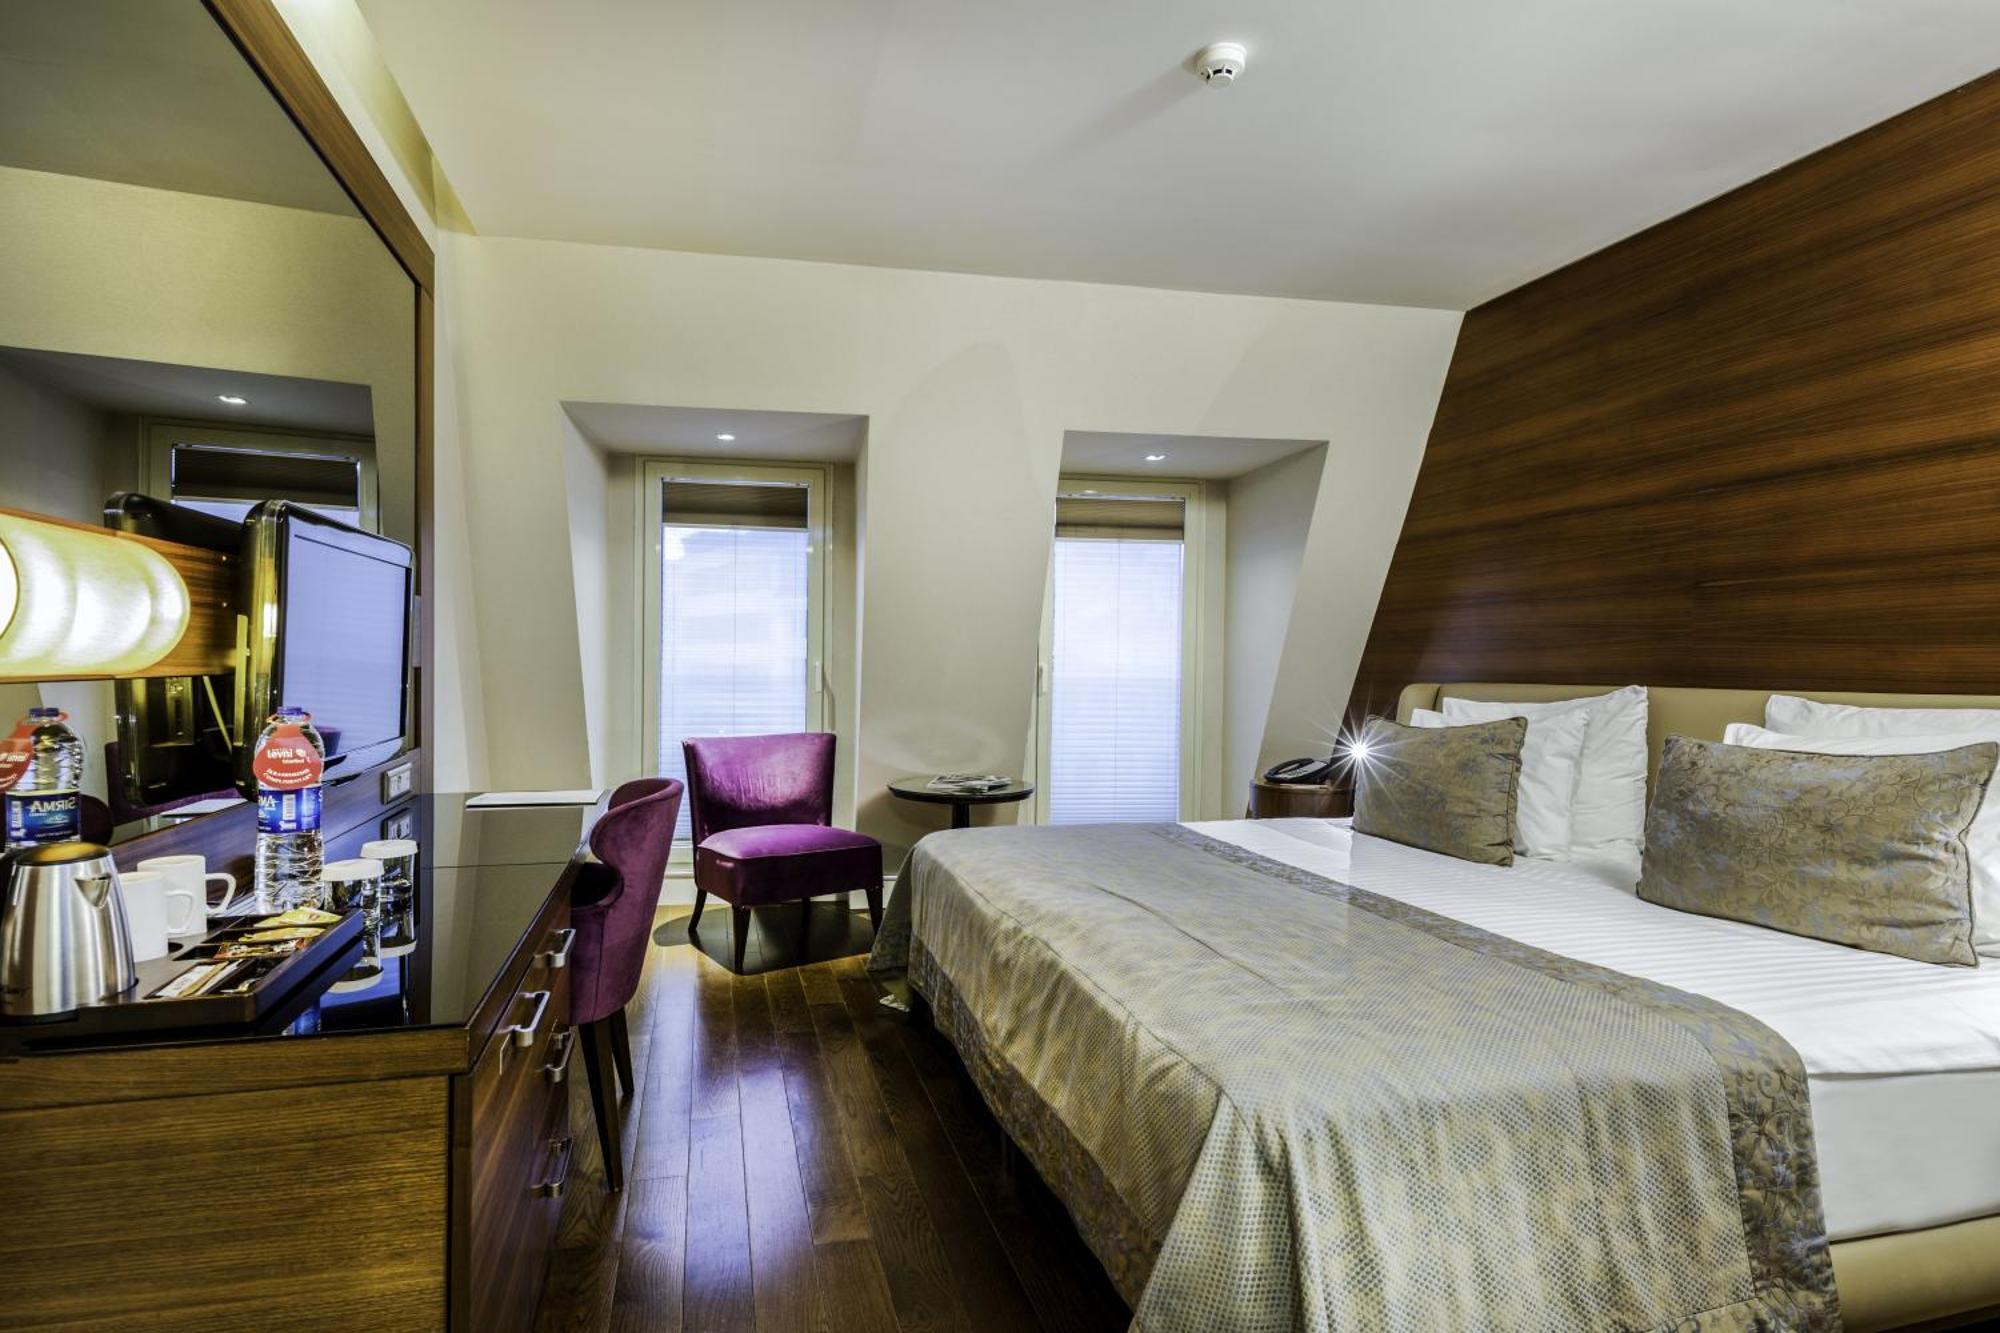 Levni Hotel & Spa - Special Category Istanbul Bagian luar foto